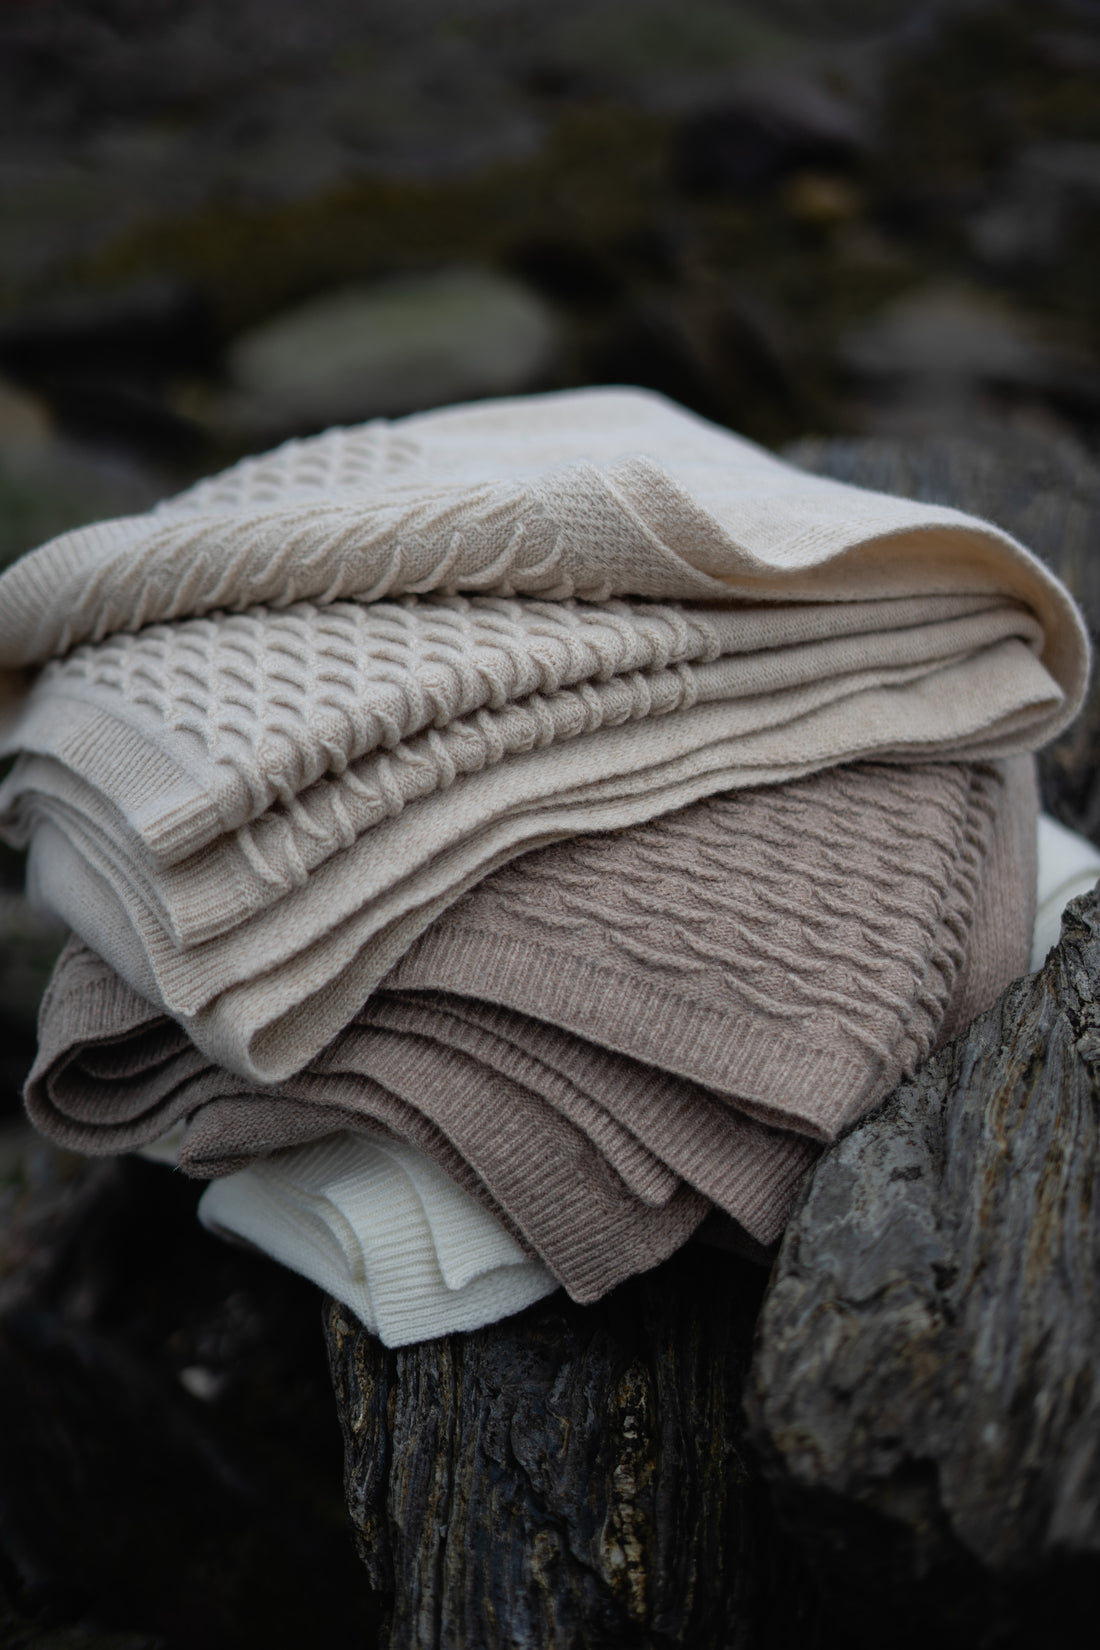 A folded stack of Evangeline Knit 100% soft lambswool throws, featuring a scalloped detail. Stack includes Oatmeal, Coffee,Pearl (top to bottom). Super soft 'hand' of lambswool. Unique scallop texture. Has the energy of a treasured knit sweater.